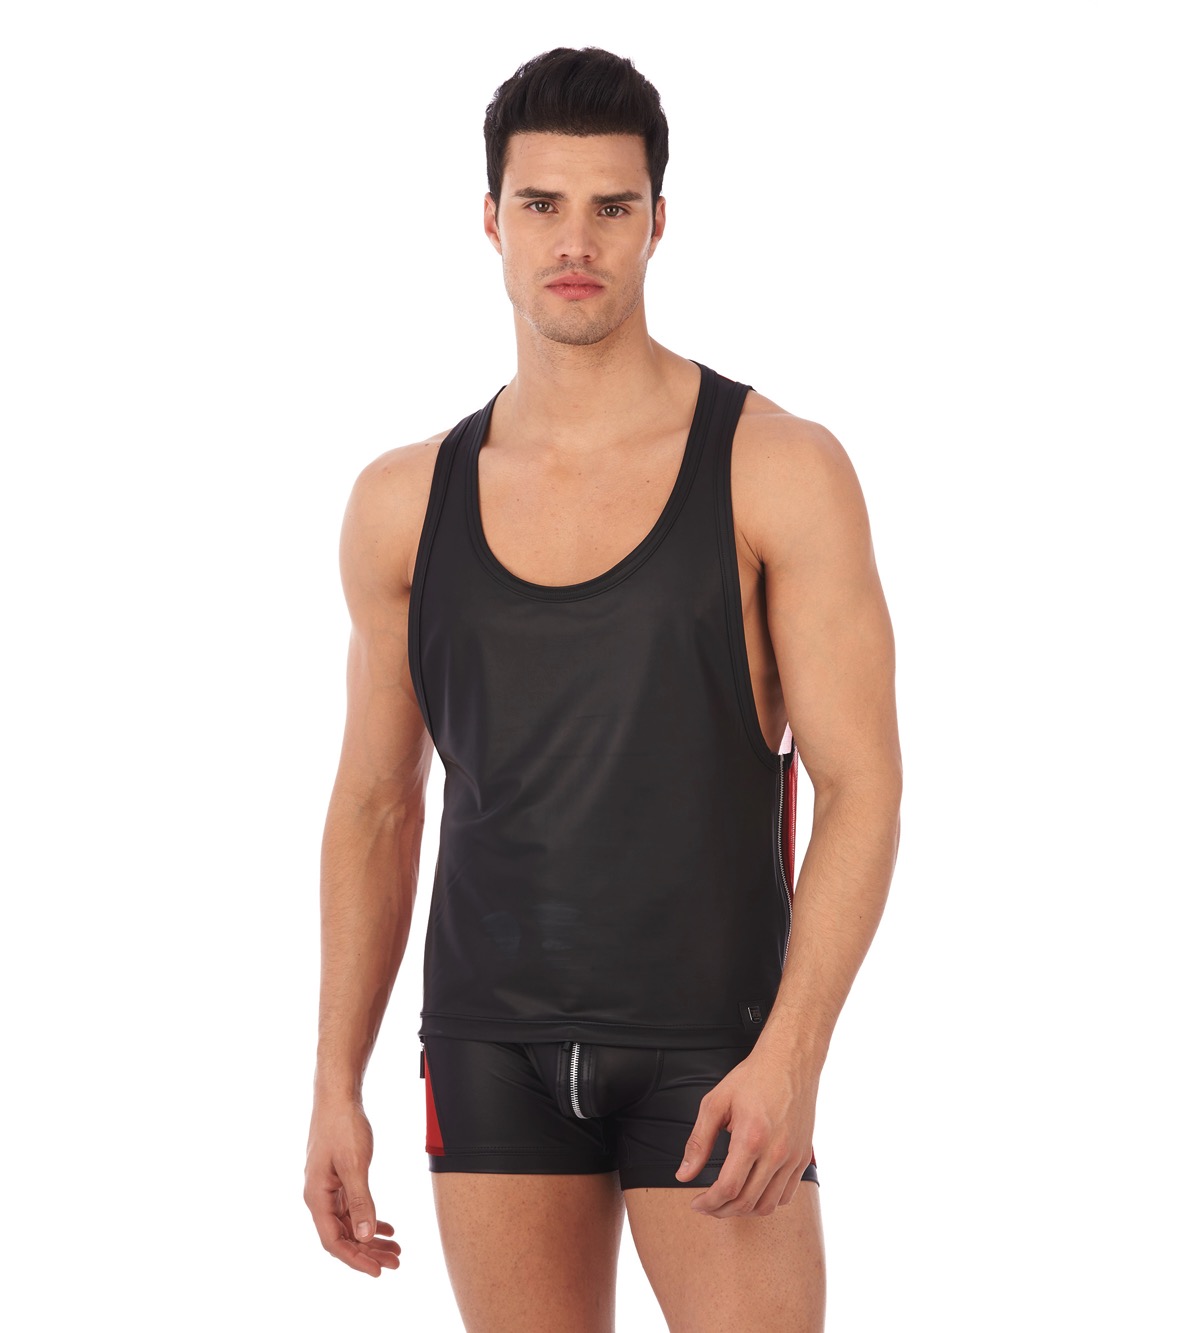 New Gregg Homme Line is Launched! | Underwear News Briefs